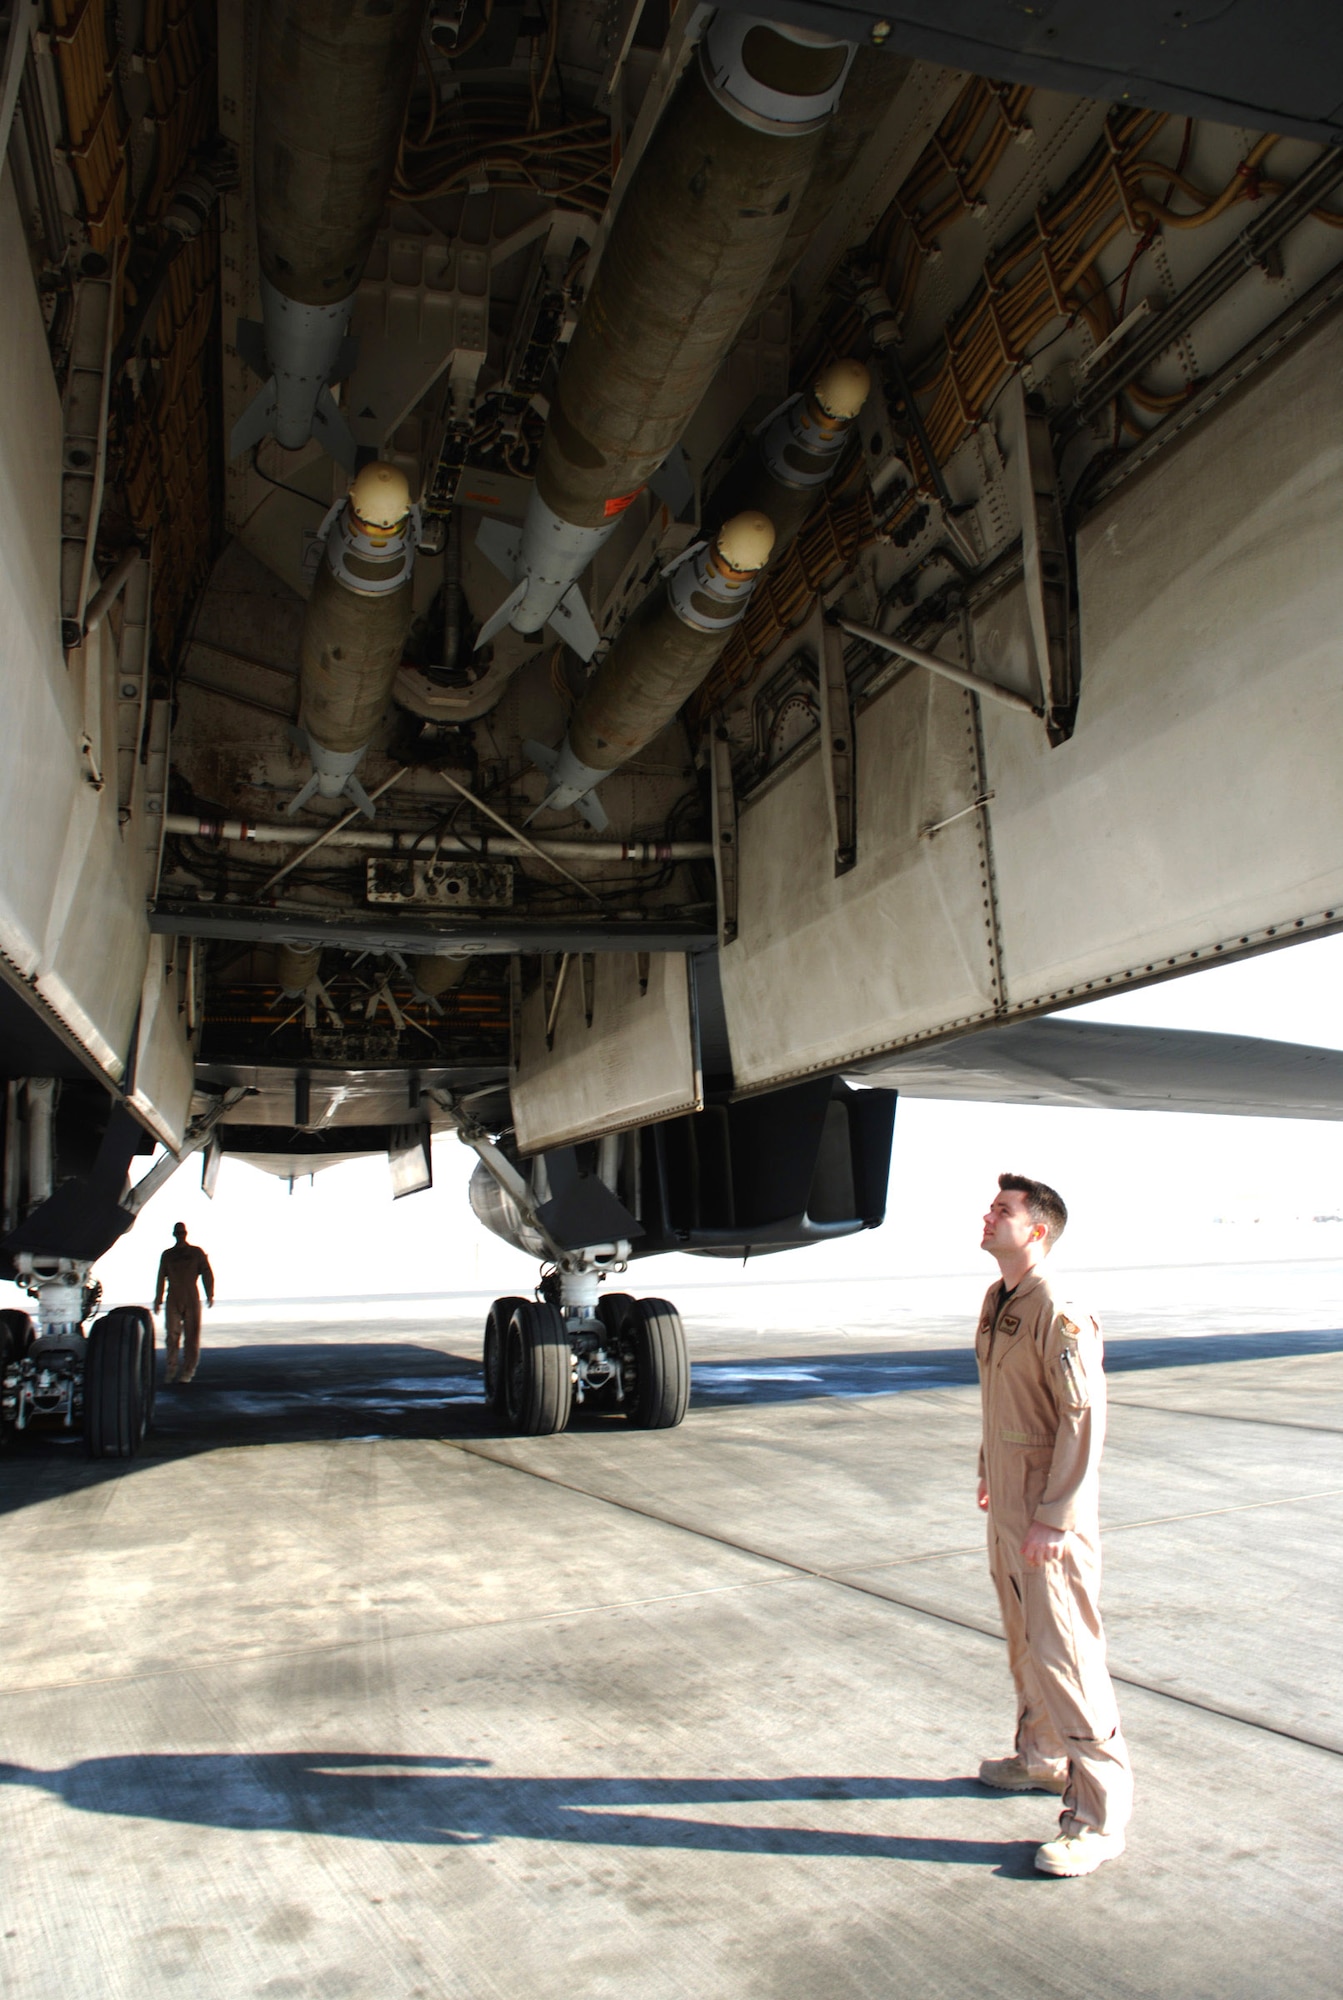 1st Lt. Jason Edwards checks the bomb load of a B-1B Lancer Dec. 29 as he and the rest of the aircrew preflight check the bomber prior to a mission. Lieutenant Edwards is with the 9th Expeditionary Bomb Squadron at an air base in Southwest Asia. (U. S. Air Force photo/Staff Sgt. Douglas Olsen)